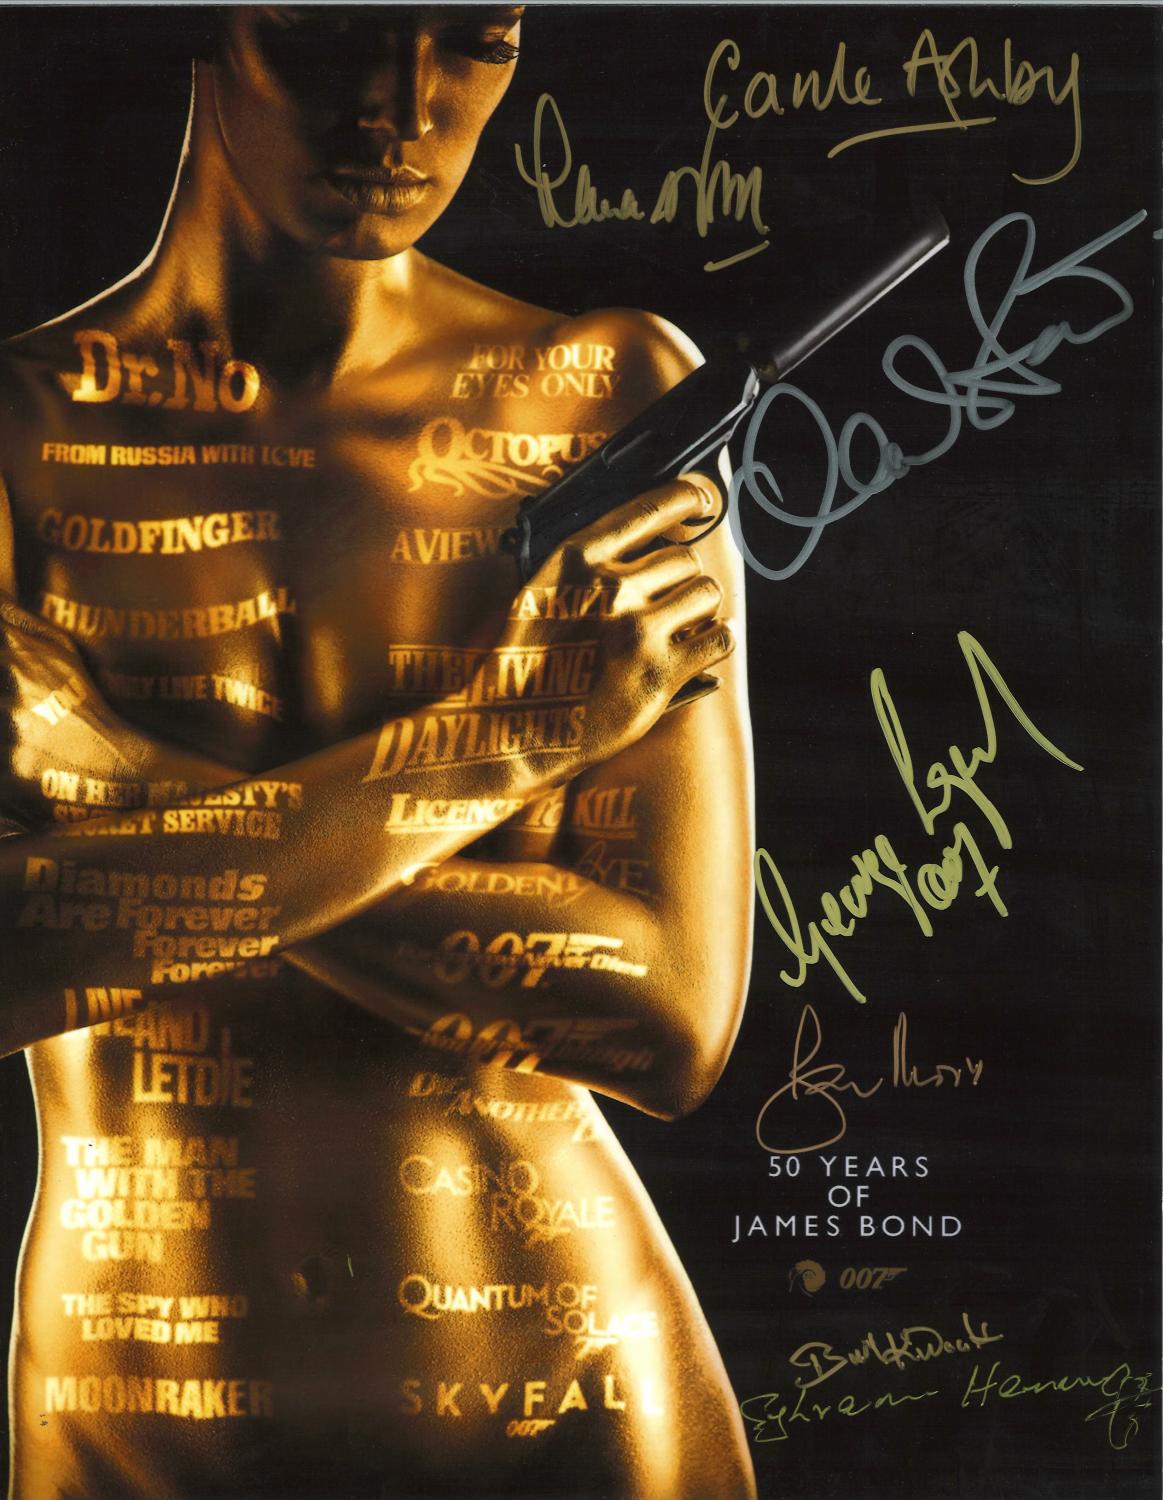 Multi signed 50 years of James Bond 14x11 colour photo. Signed by 7 including Carole Ashby, Lana